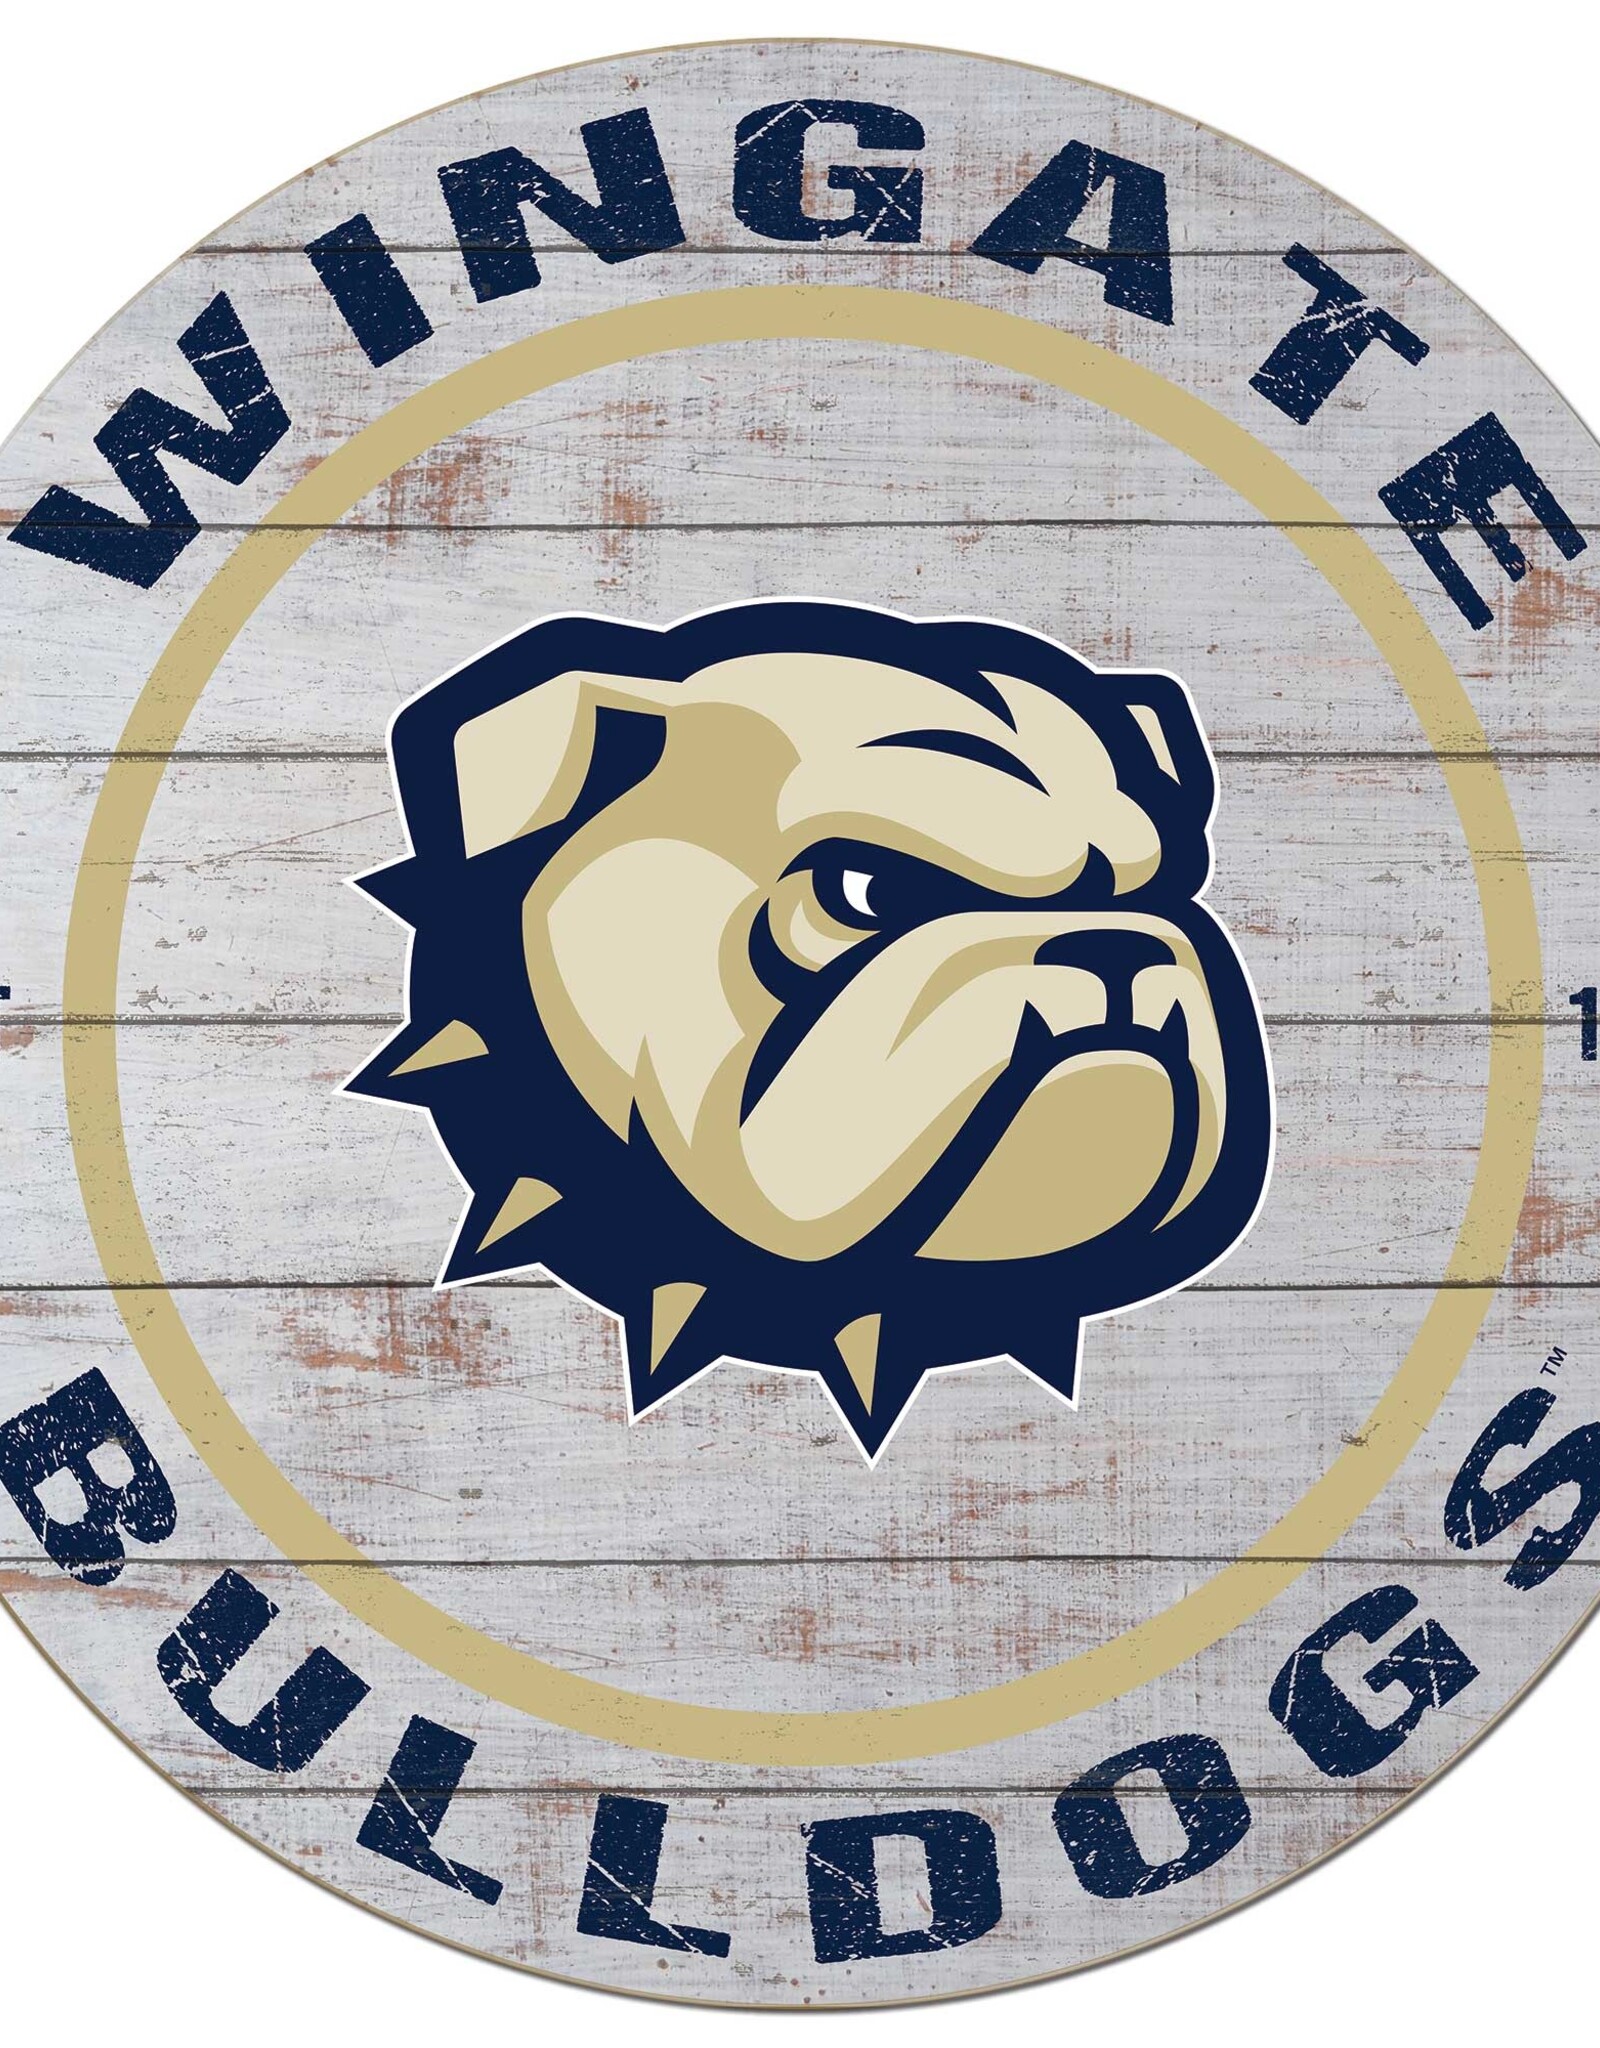 DROP SHIP ONLY 20 x 20 Wingate Dog Head Bulldogs 1896 Weathered Wood Sign (ONLINE ONLY)